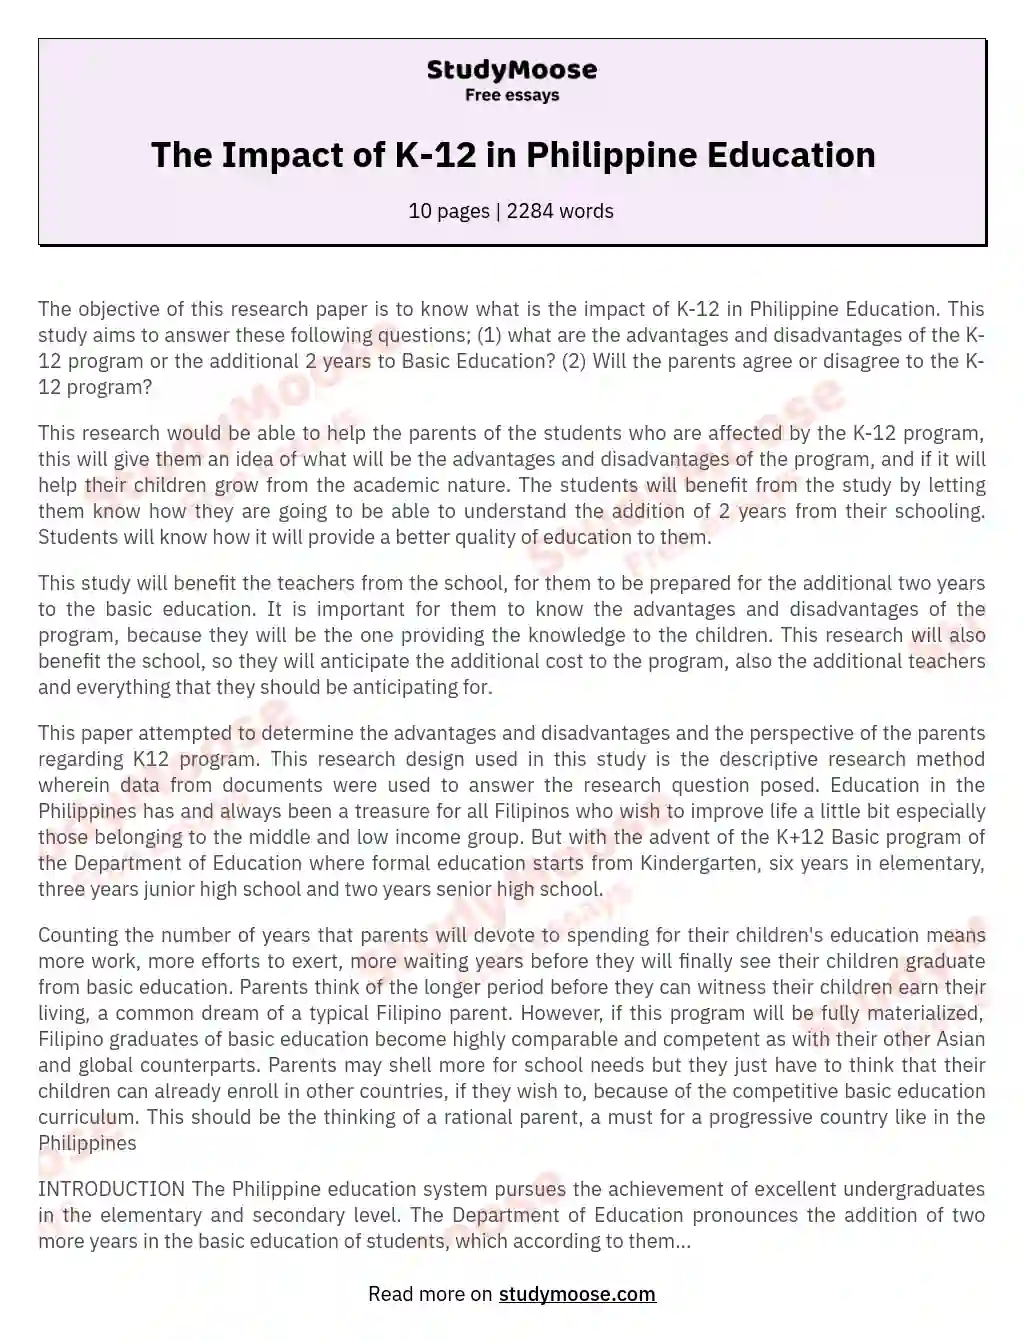 The Impact of K-12 in Philippine Education essay